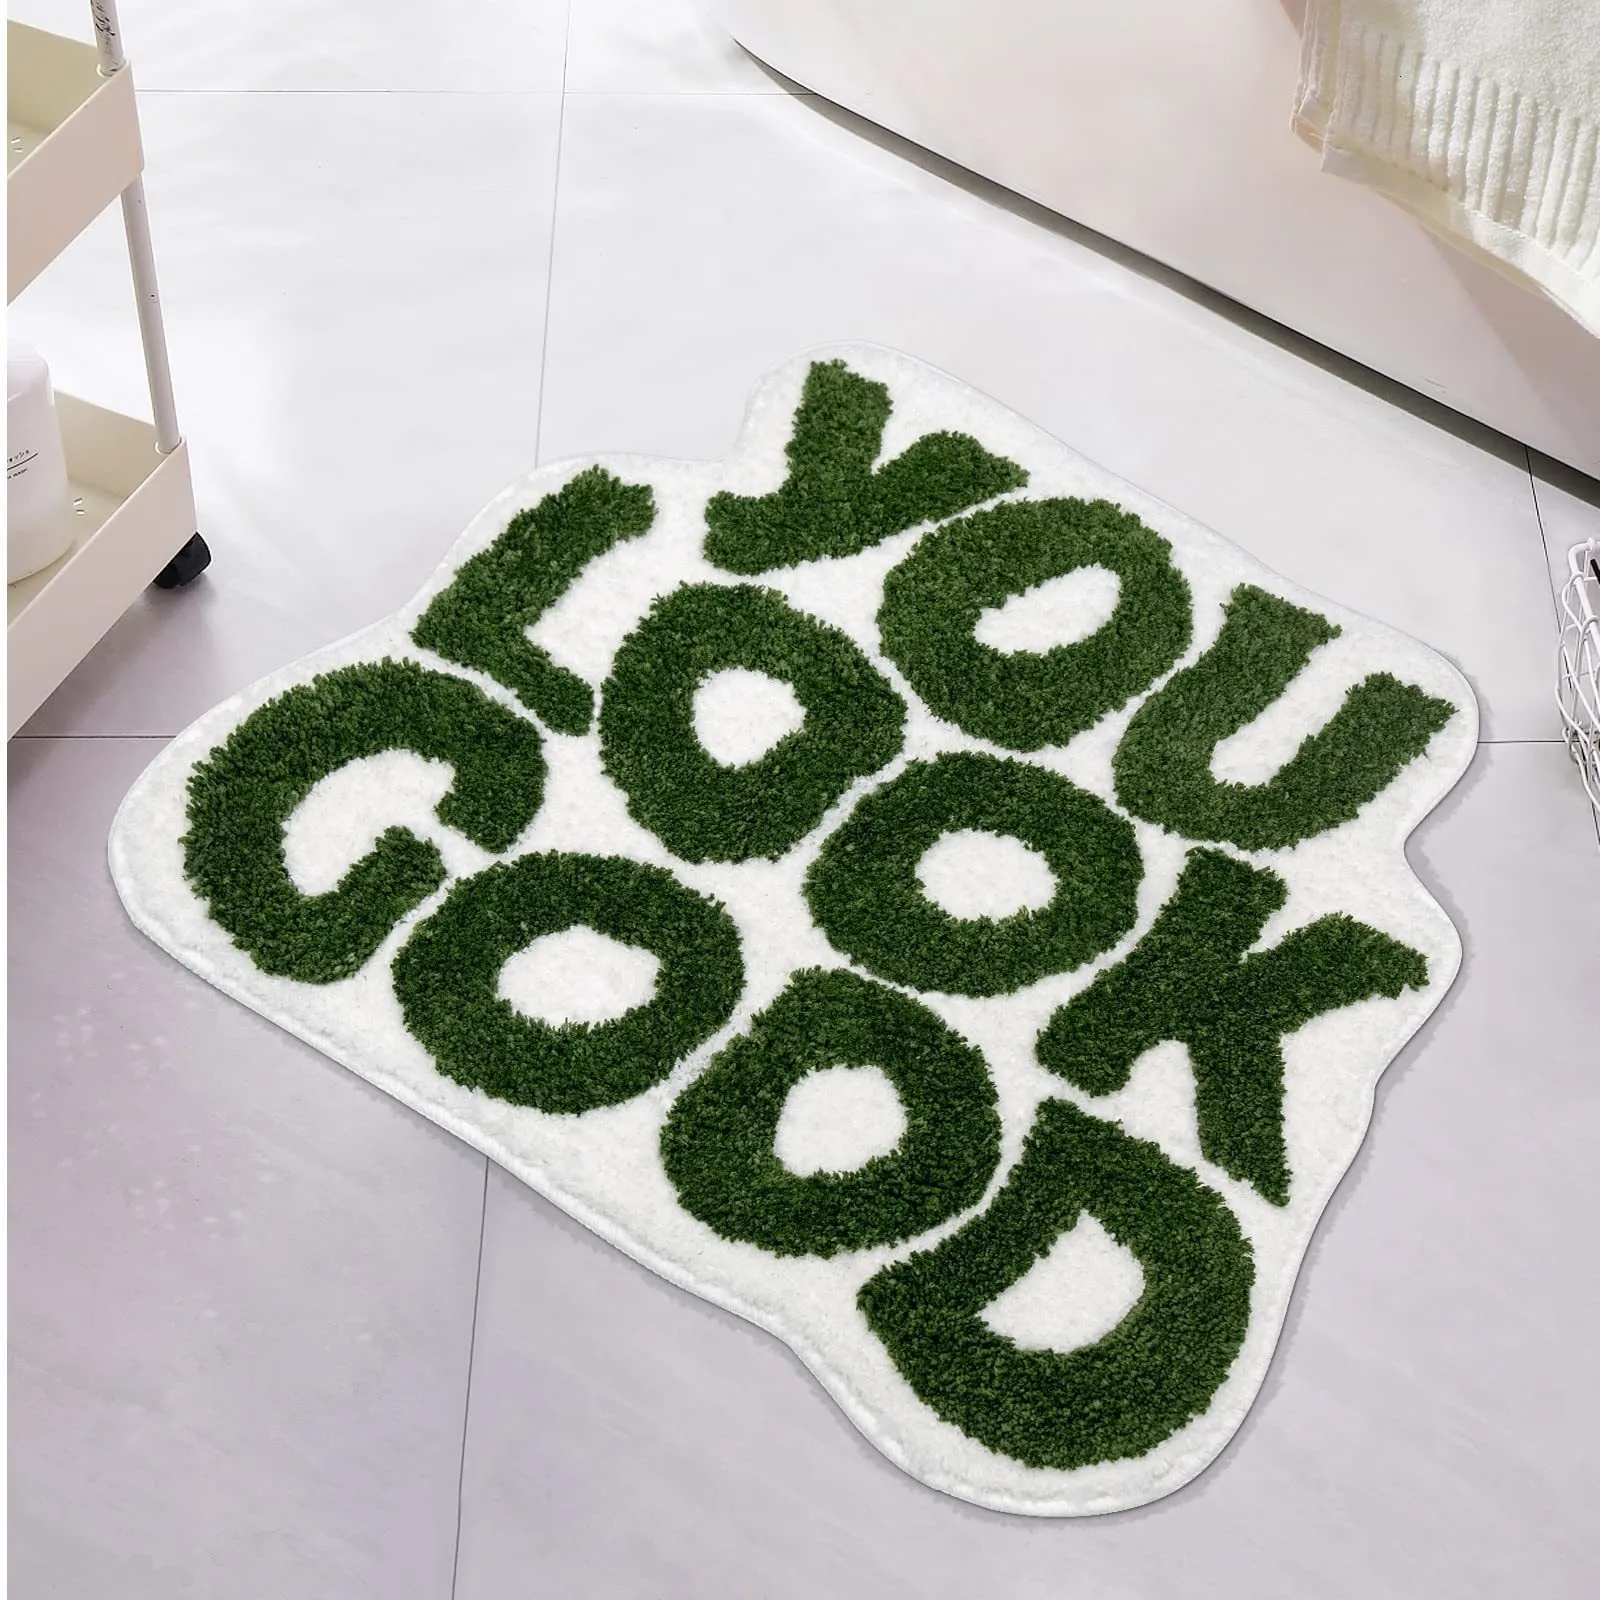 Green Non Skid Bath Rugs Cute Preppy Design For Shower, Bathroom, And More  Microfiber Washable And Absorbent From Zhi10, $12.59